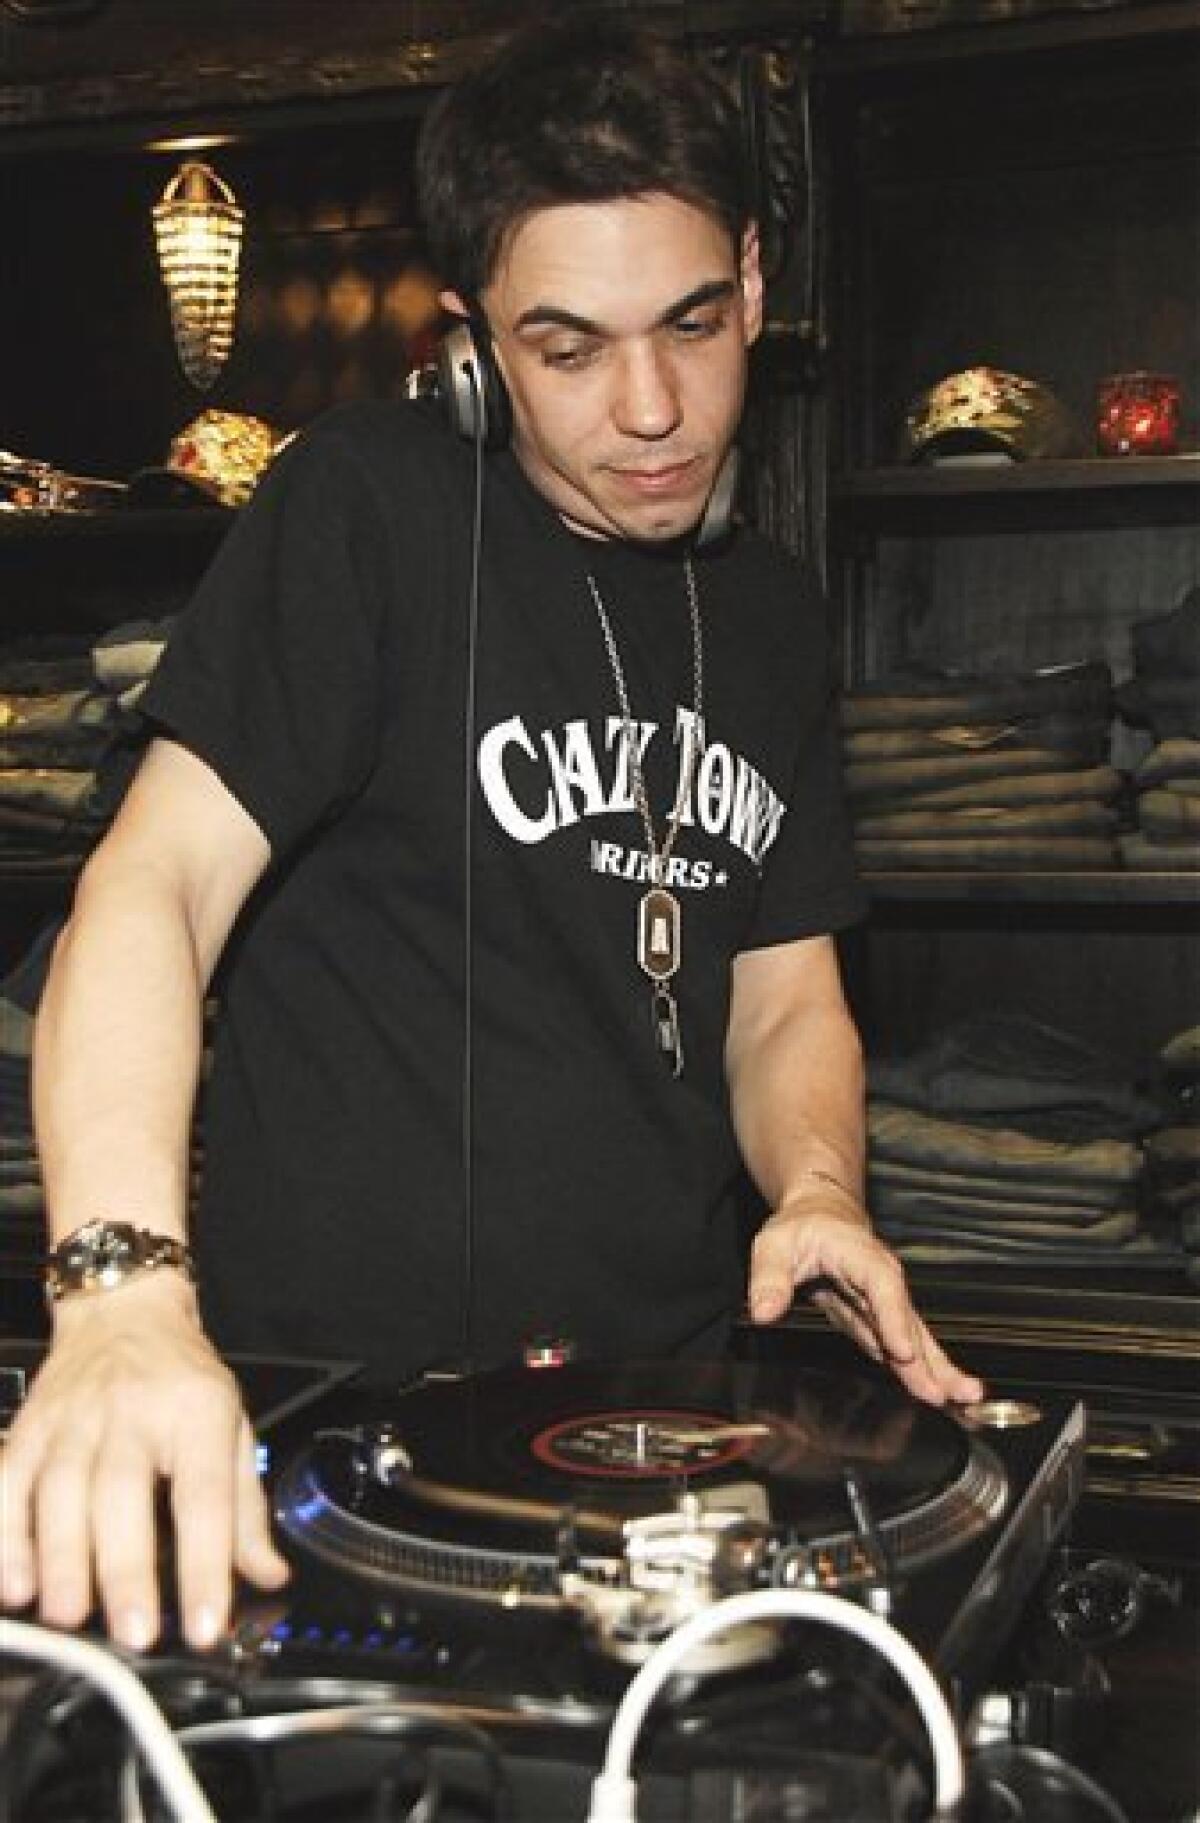 In this March 18, 2006 photo, celebrity disc jockey Adam Goldstein, also known as DJ AM, spins records at the Moody Blues clothing store opening in Scottsdale, Ariz. A law enforcement official says the celebrity disc jockey known as DJ AM has been found dead in a New York City apartment. (AP Photo/Dan Steinberg)